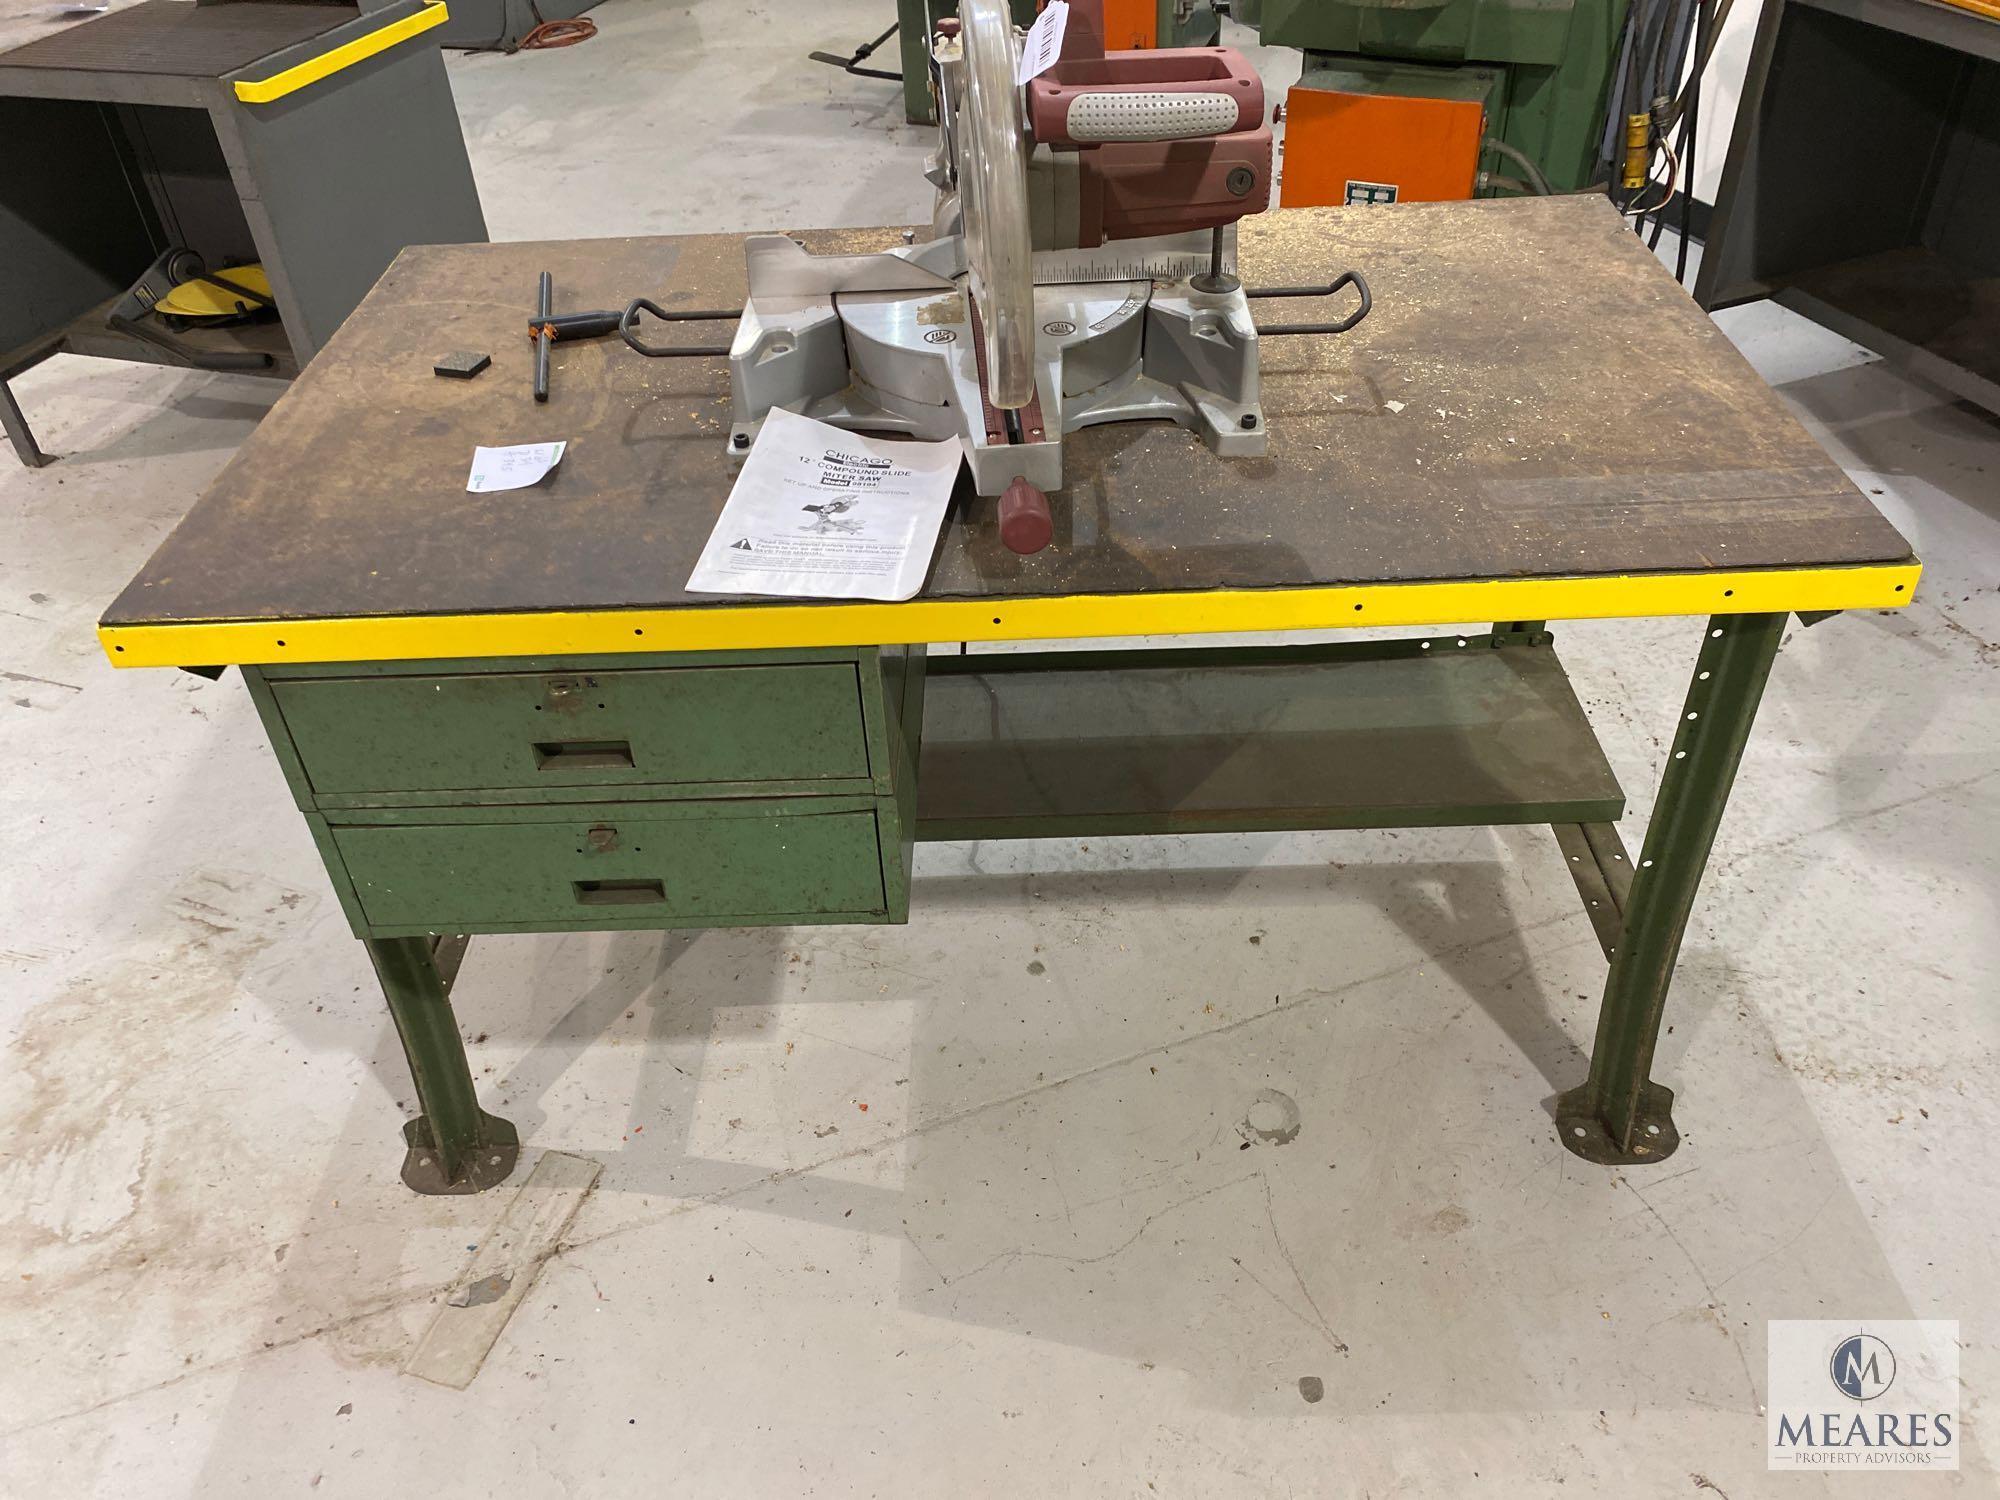 Chicago 12" Compound Miter Saw Mounted on Metal Worktable